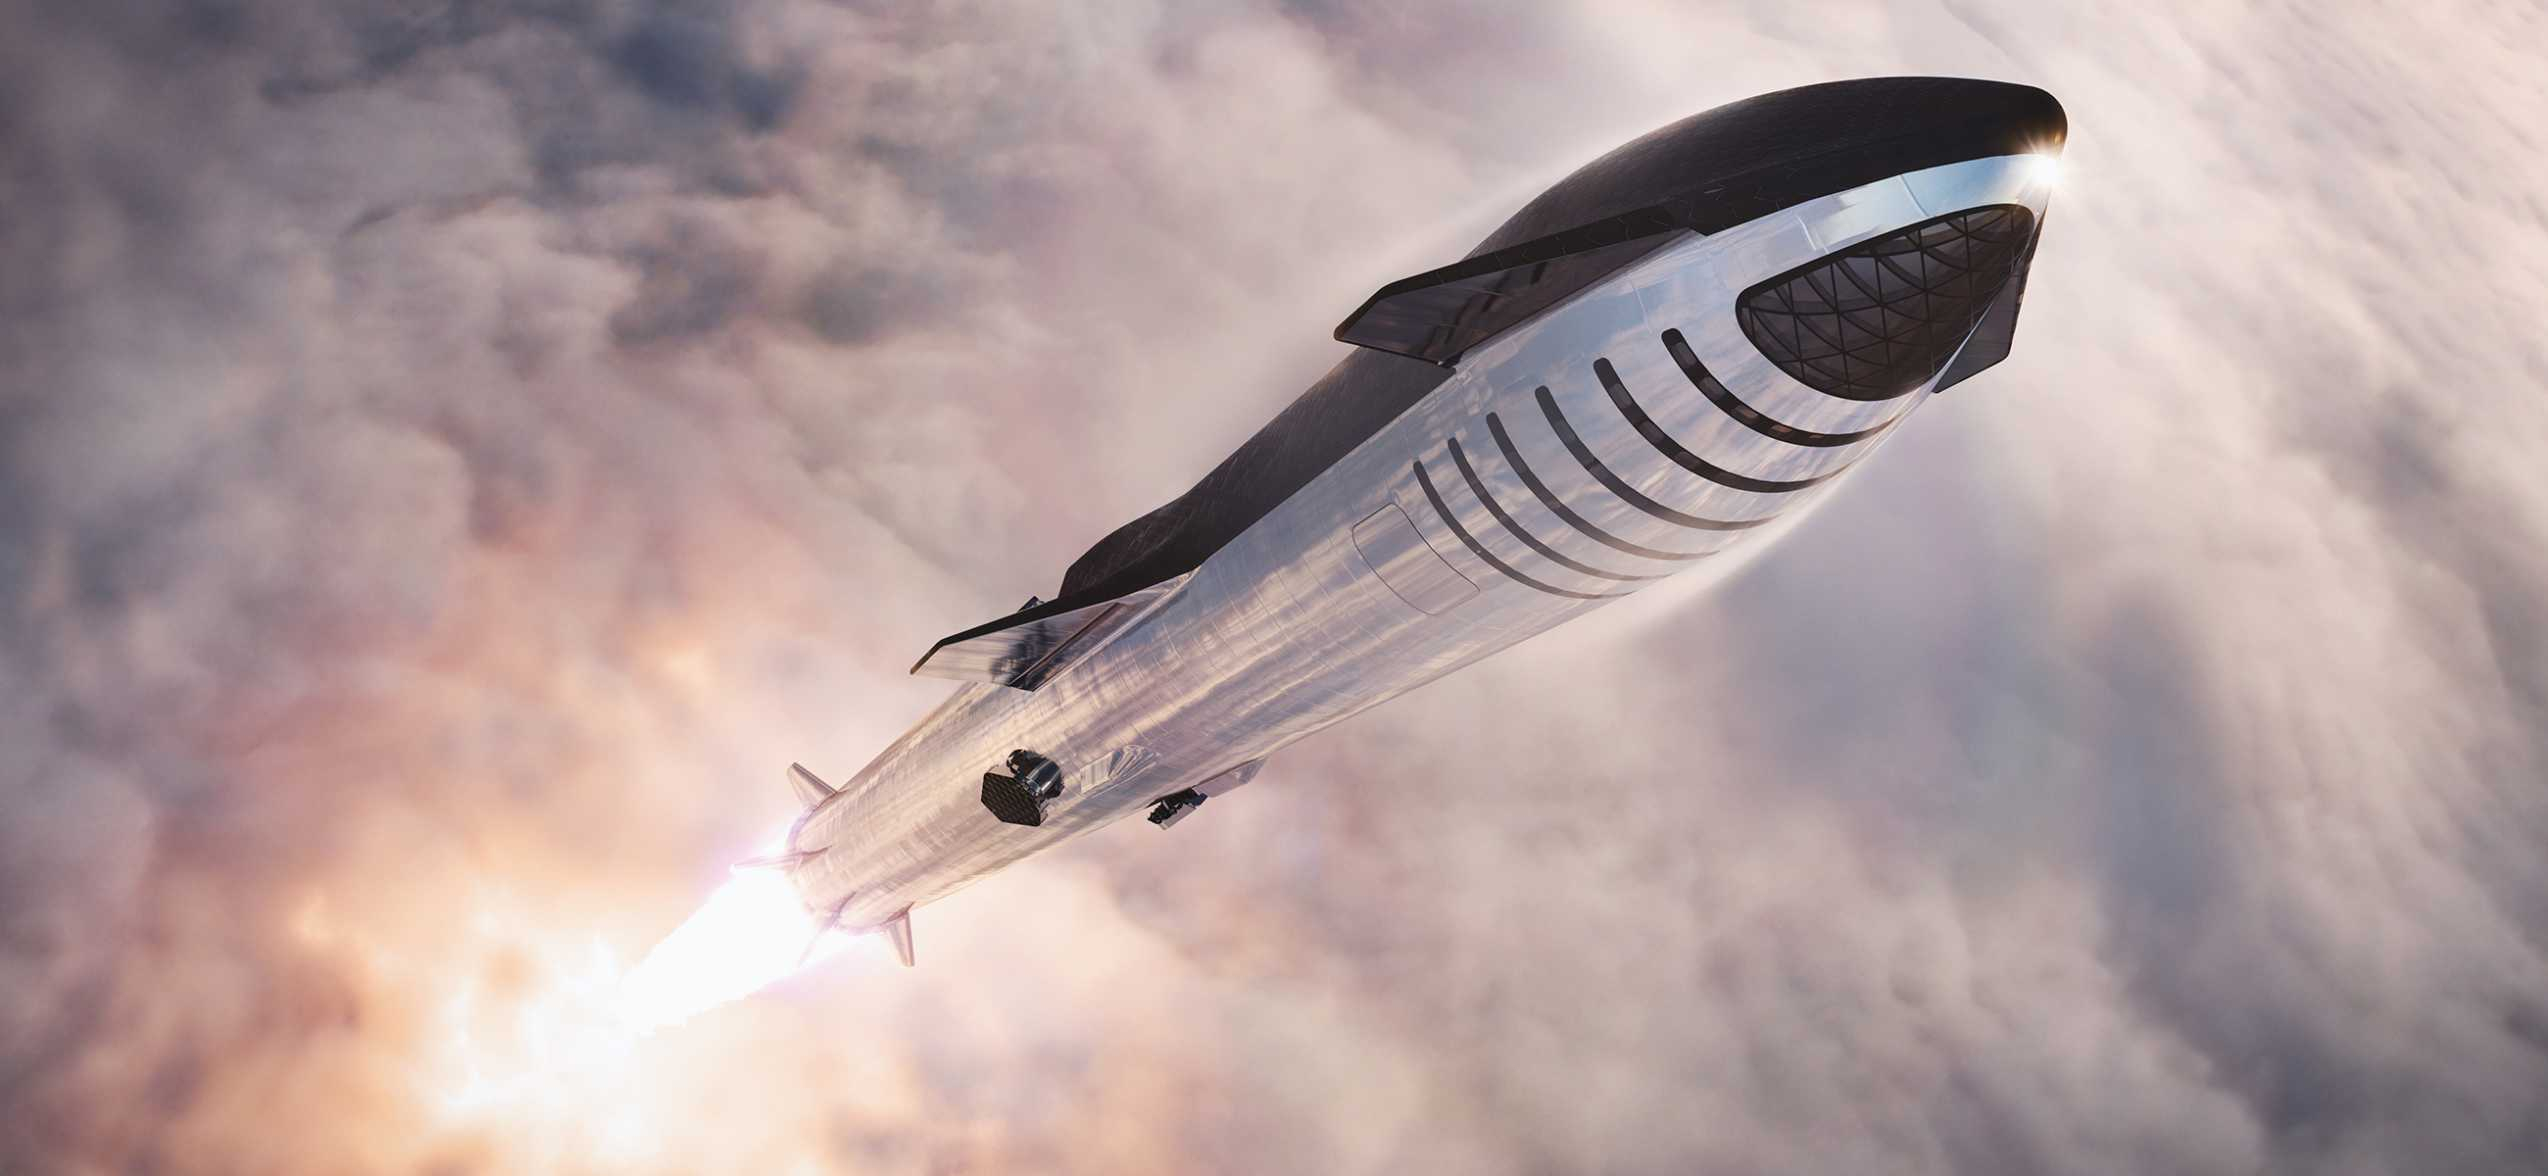 2548x1176 SpaceX Starship HD Wallpapers and Backgrounds